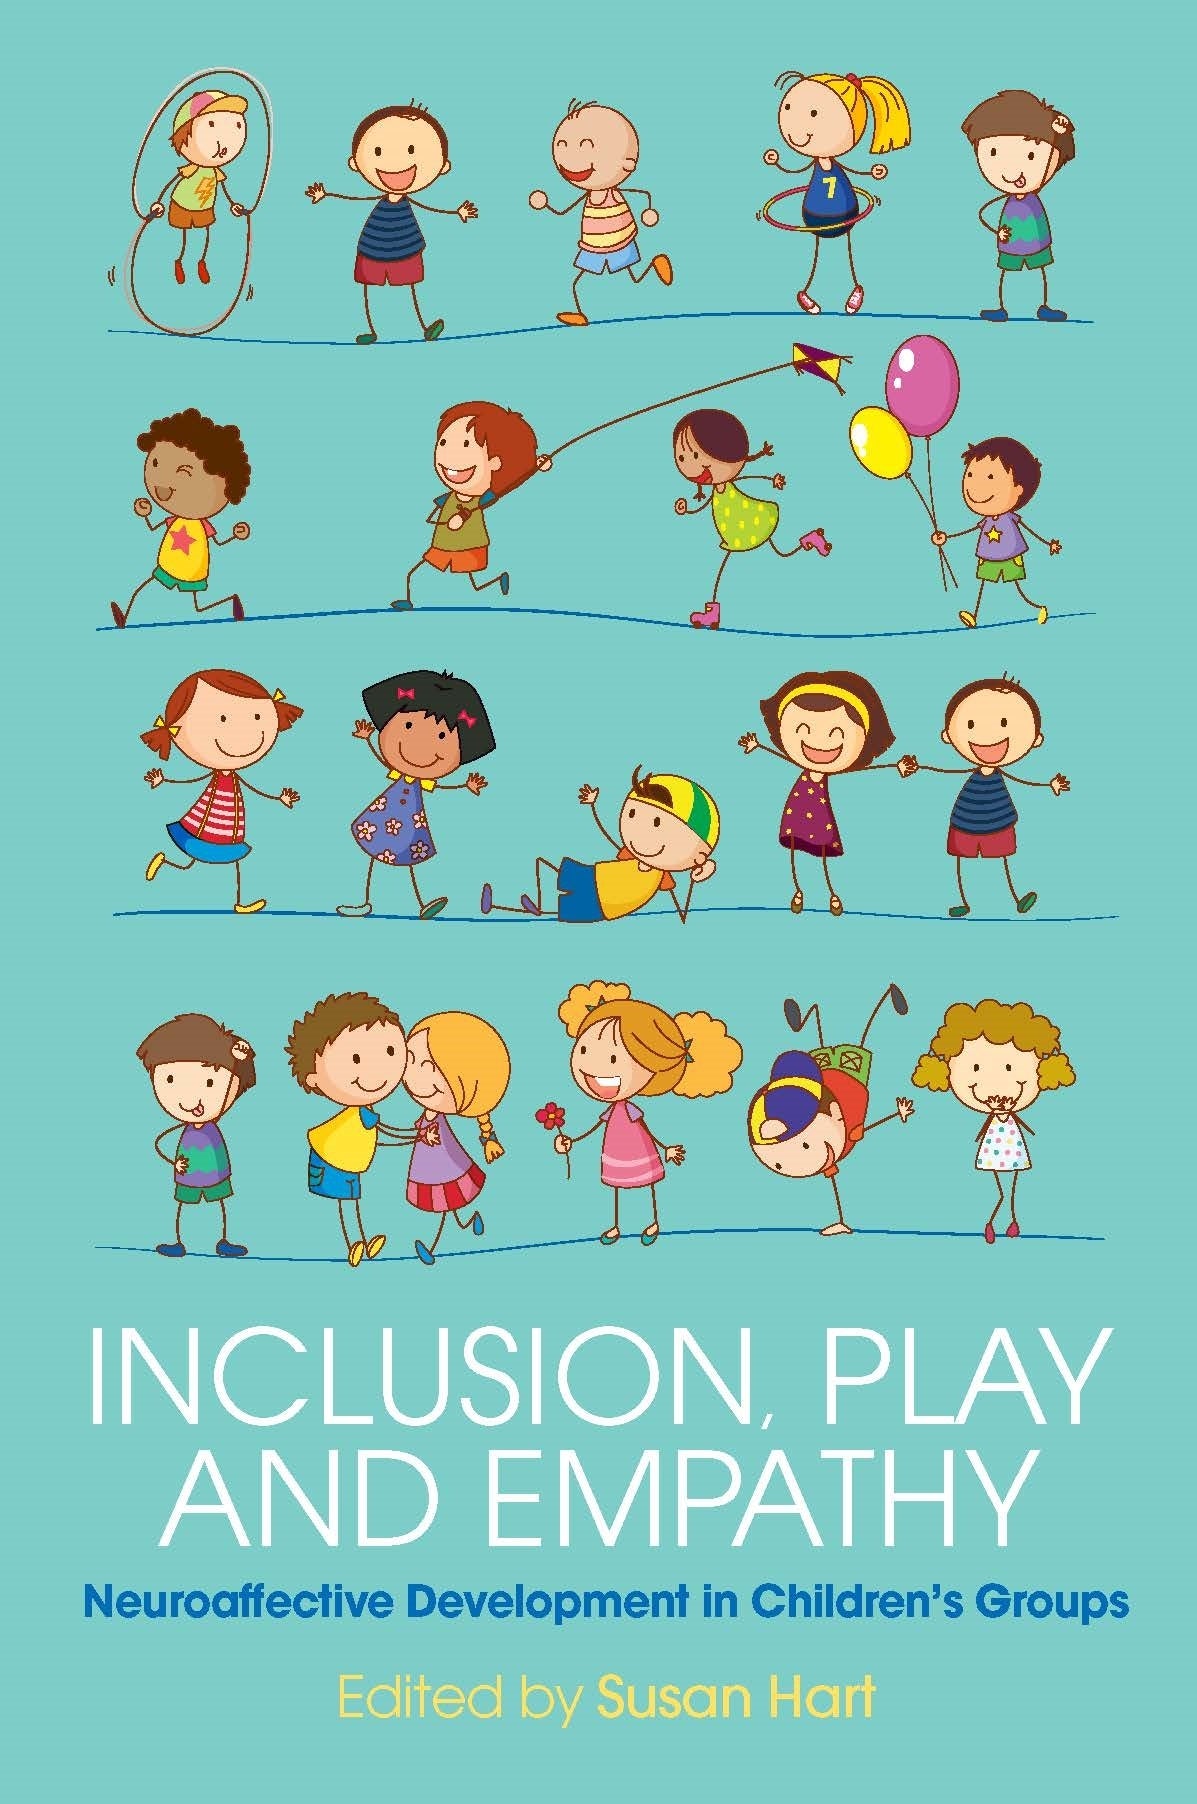 Inclusion, Play and Empathy by Susan Hart, Phyllis Booth, No Author Listed